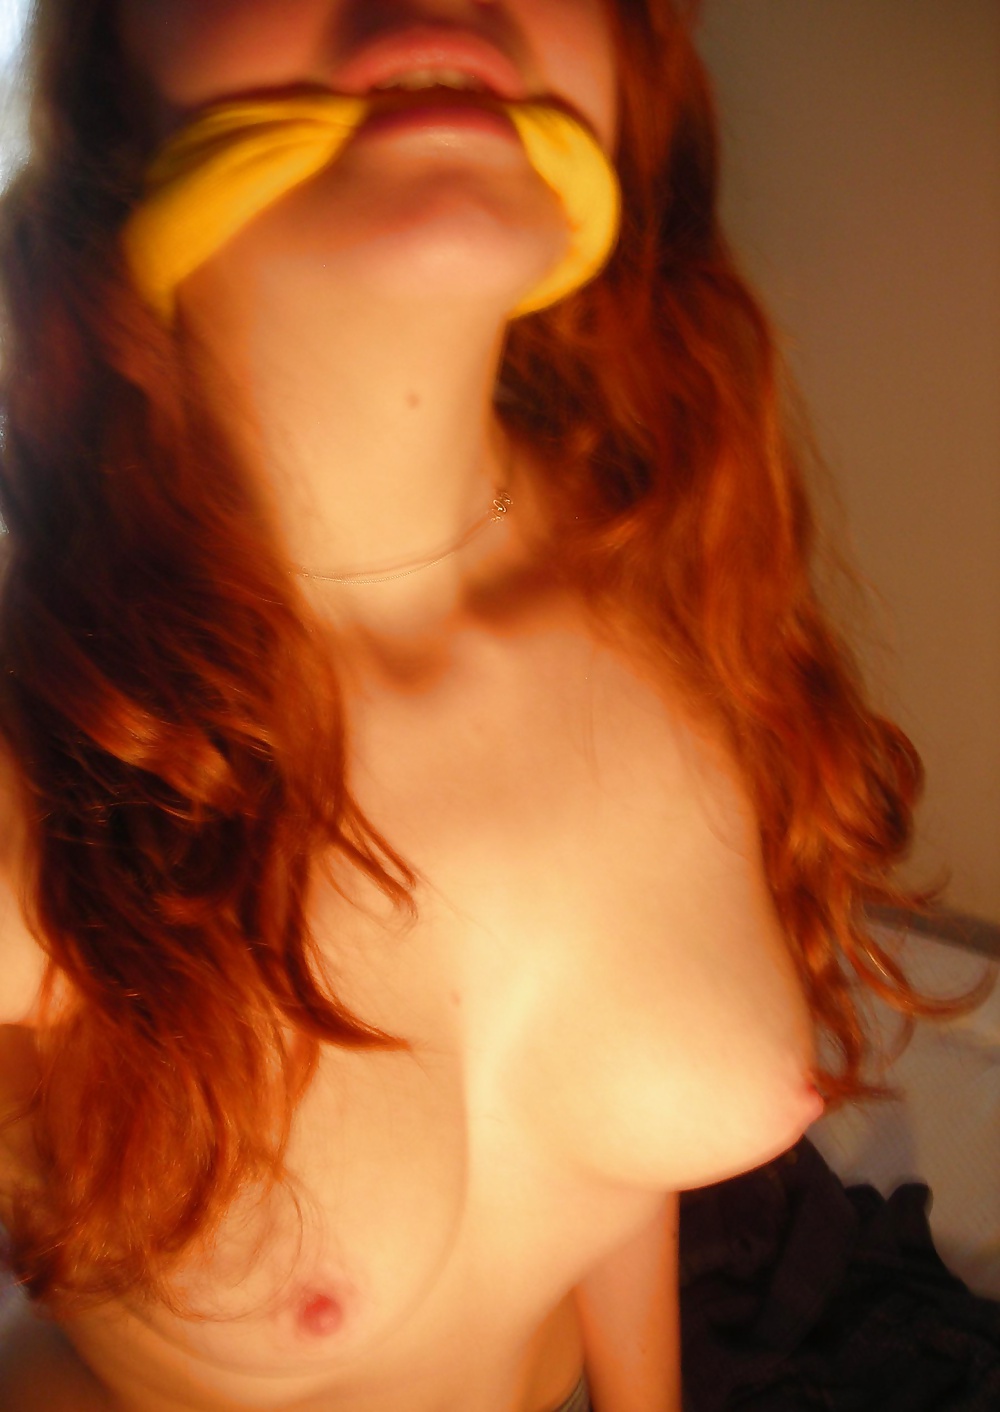 Hot redhead show her body pict gal